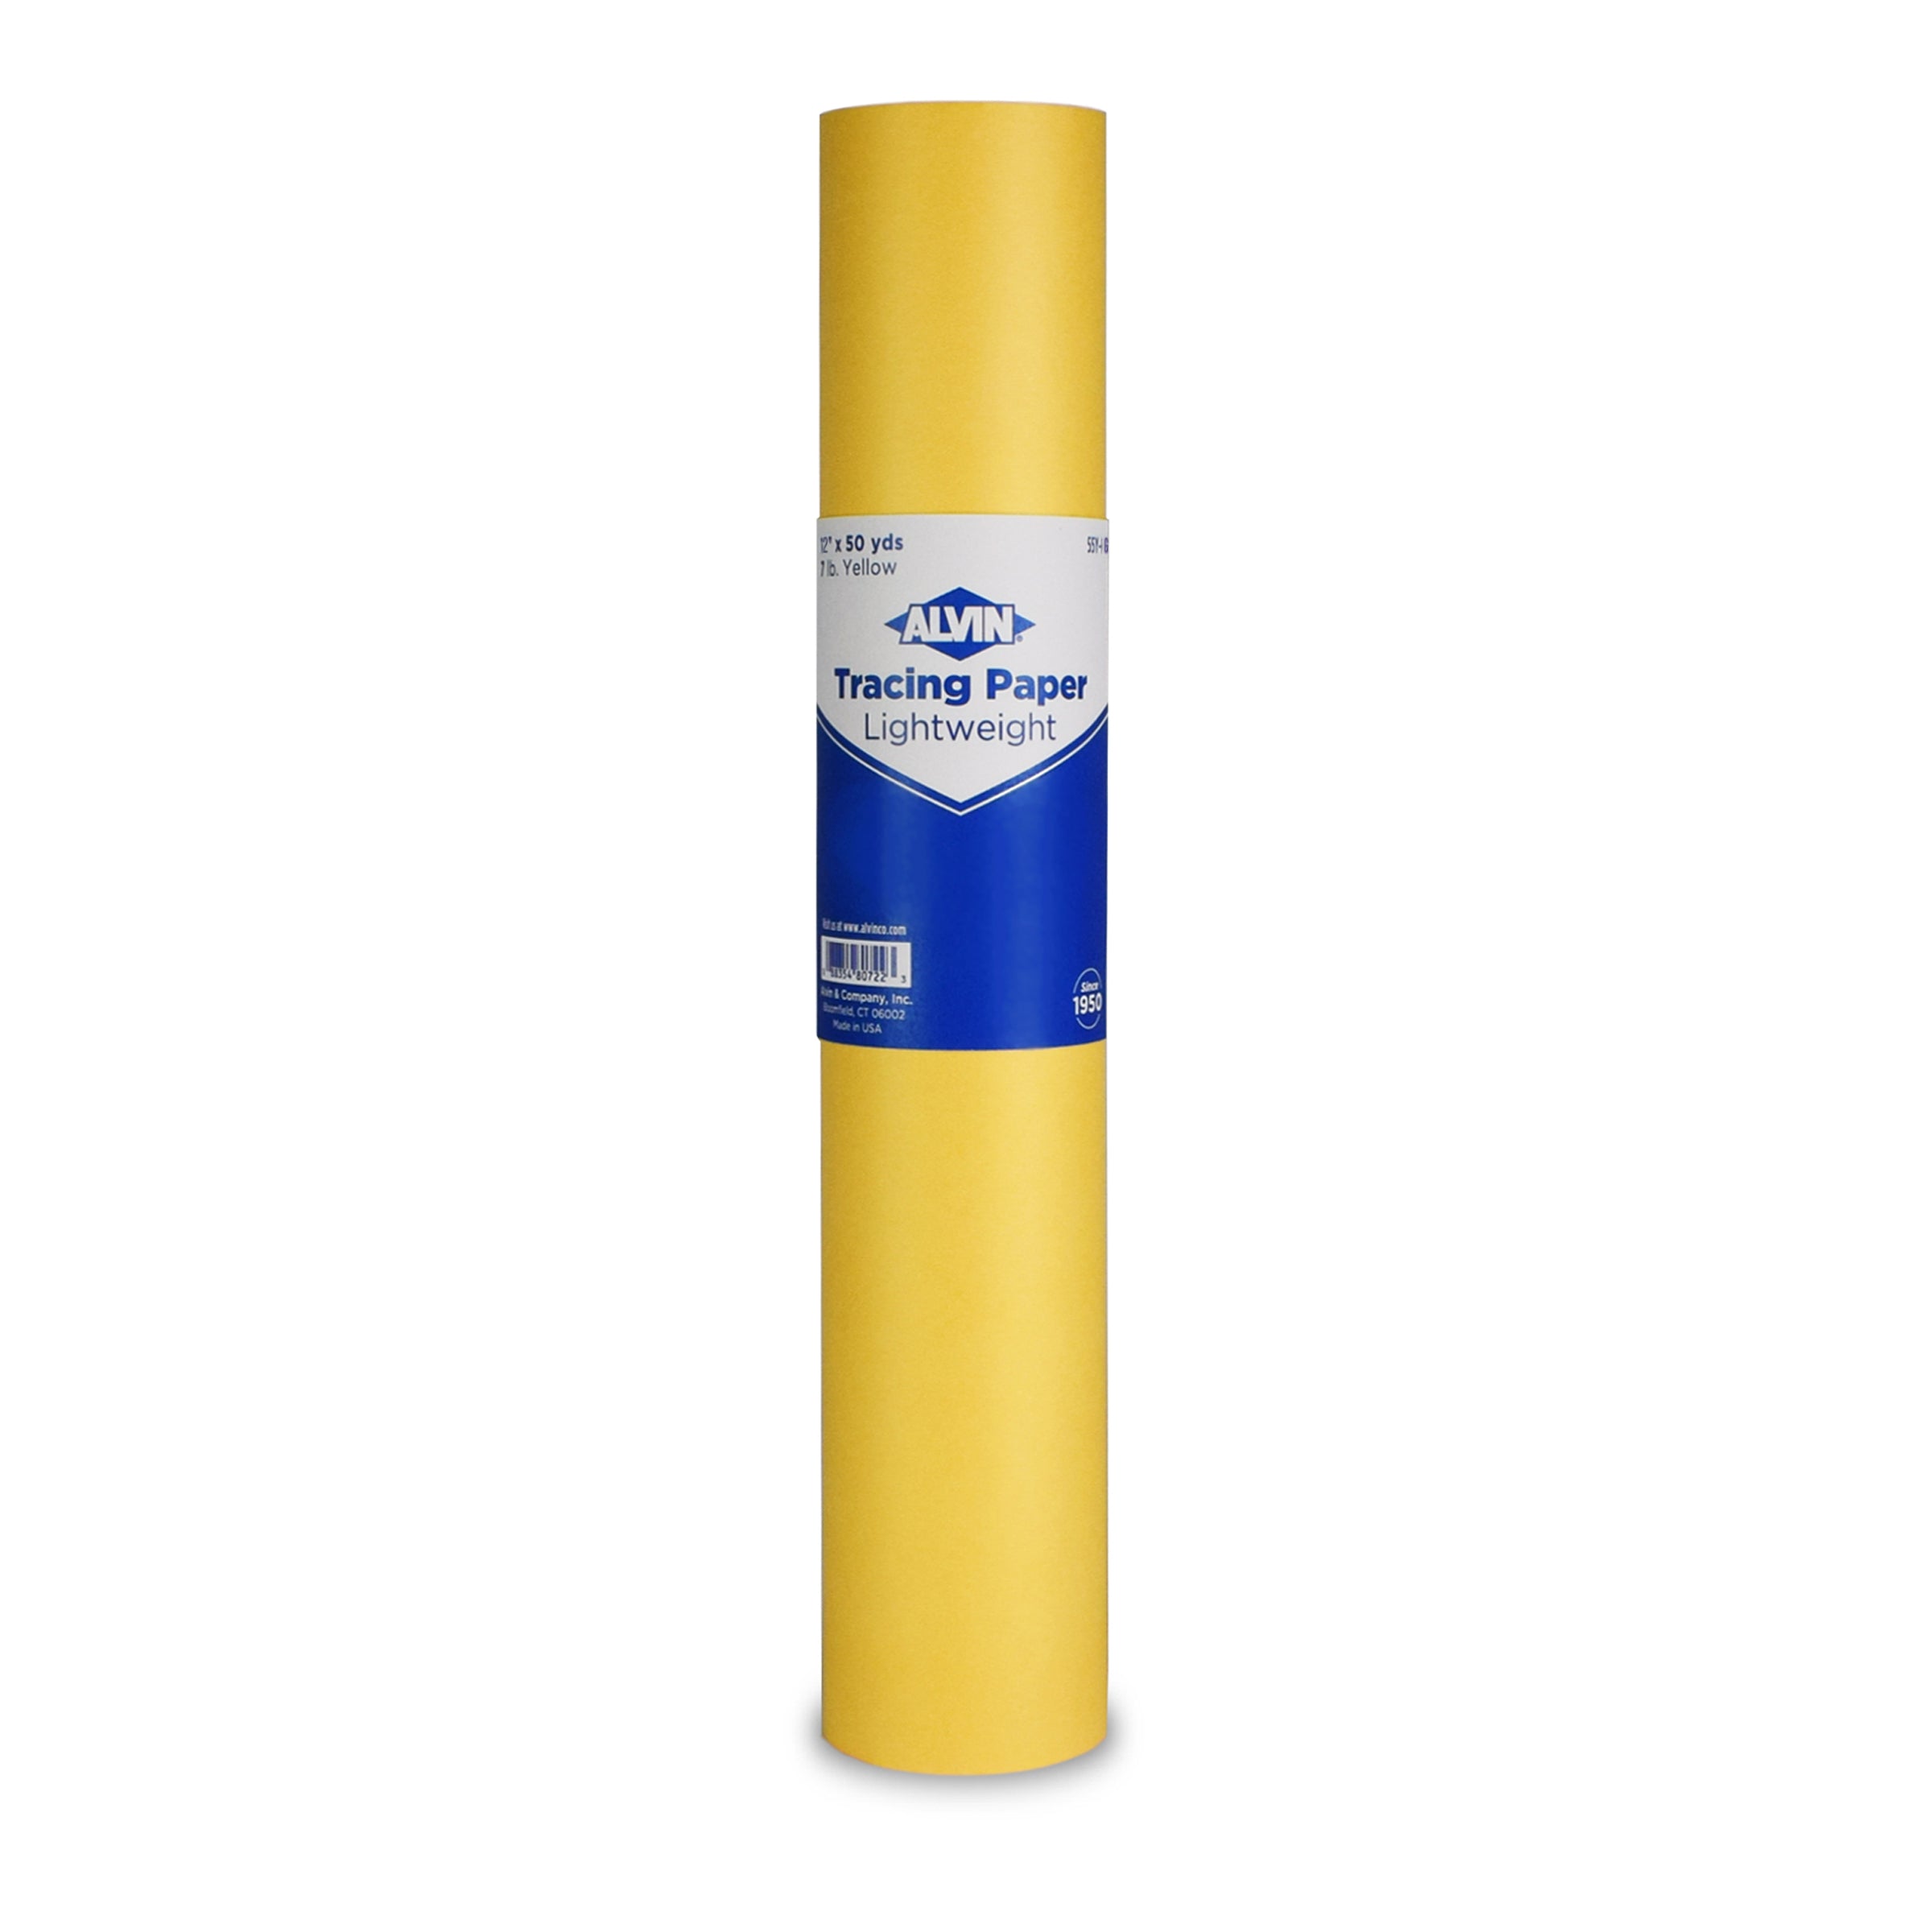 Bee Paper White Sketch and Trace Roll, 24-Inch by 50-Yards